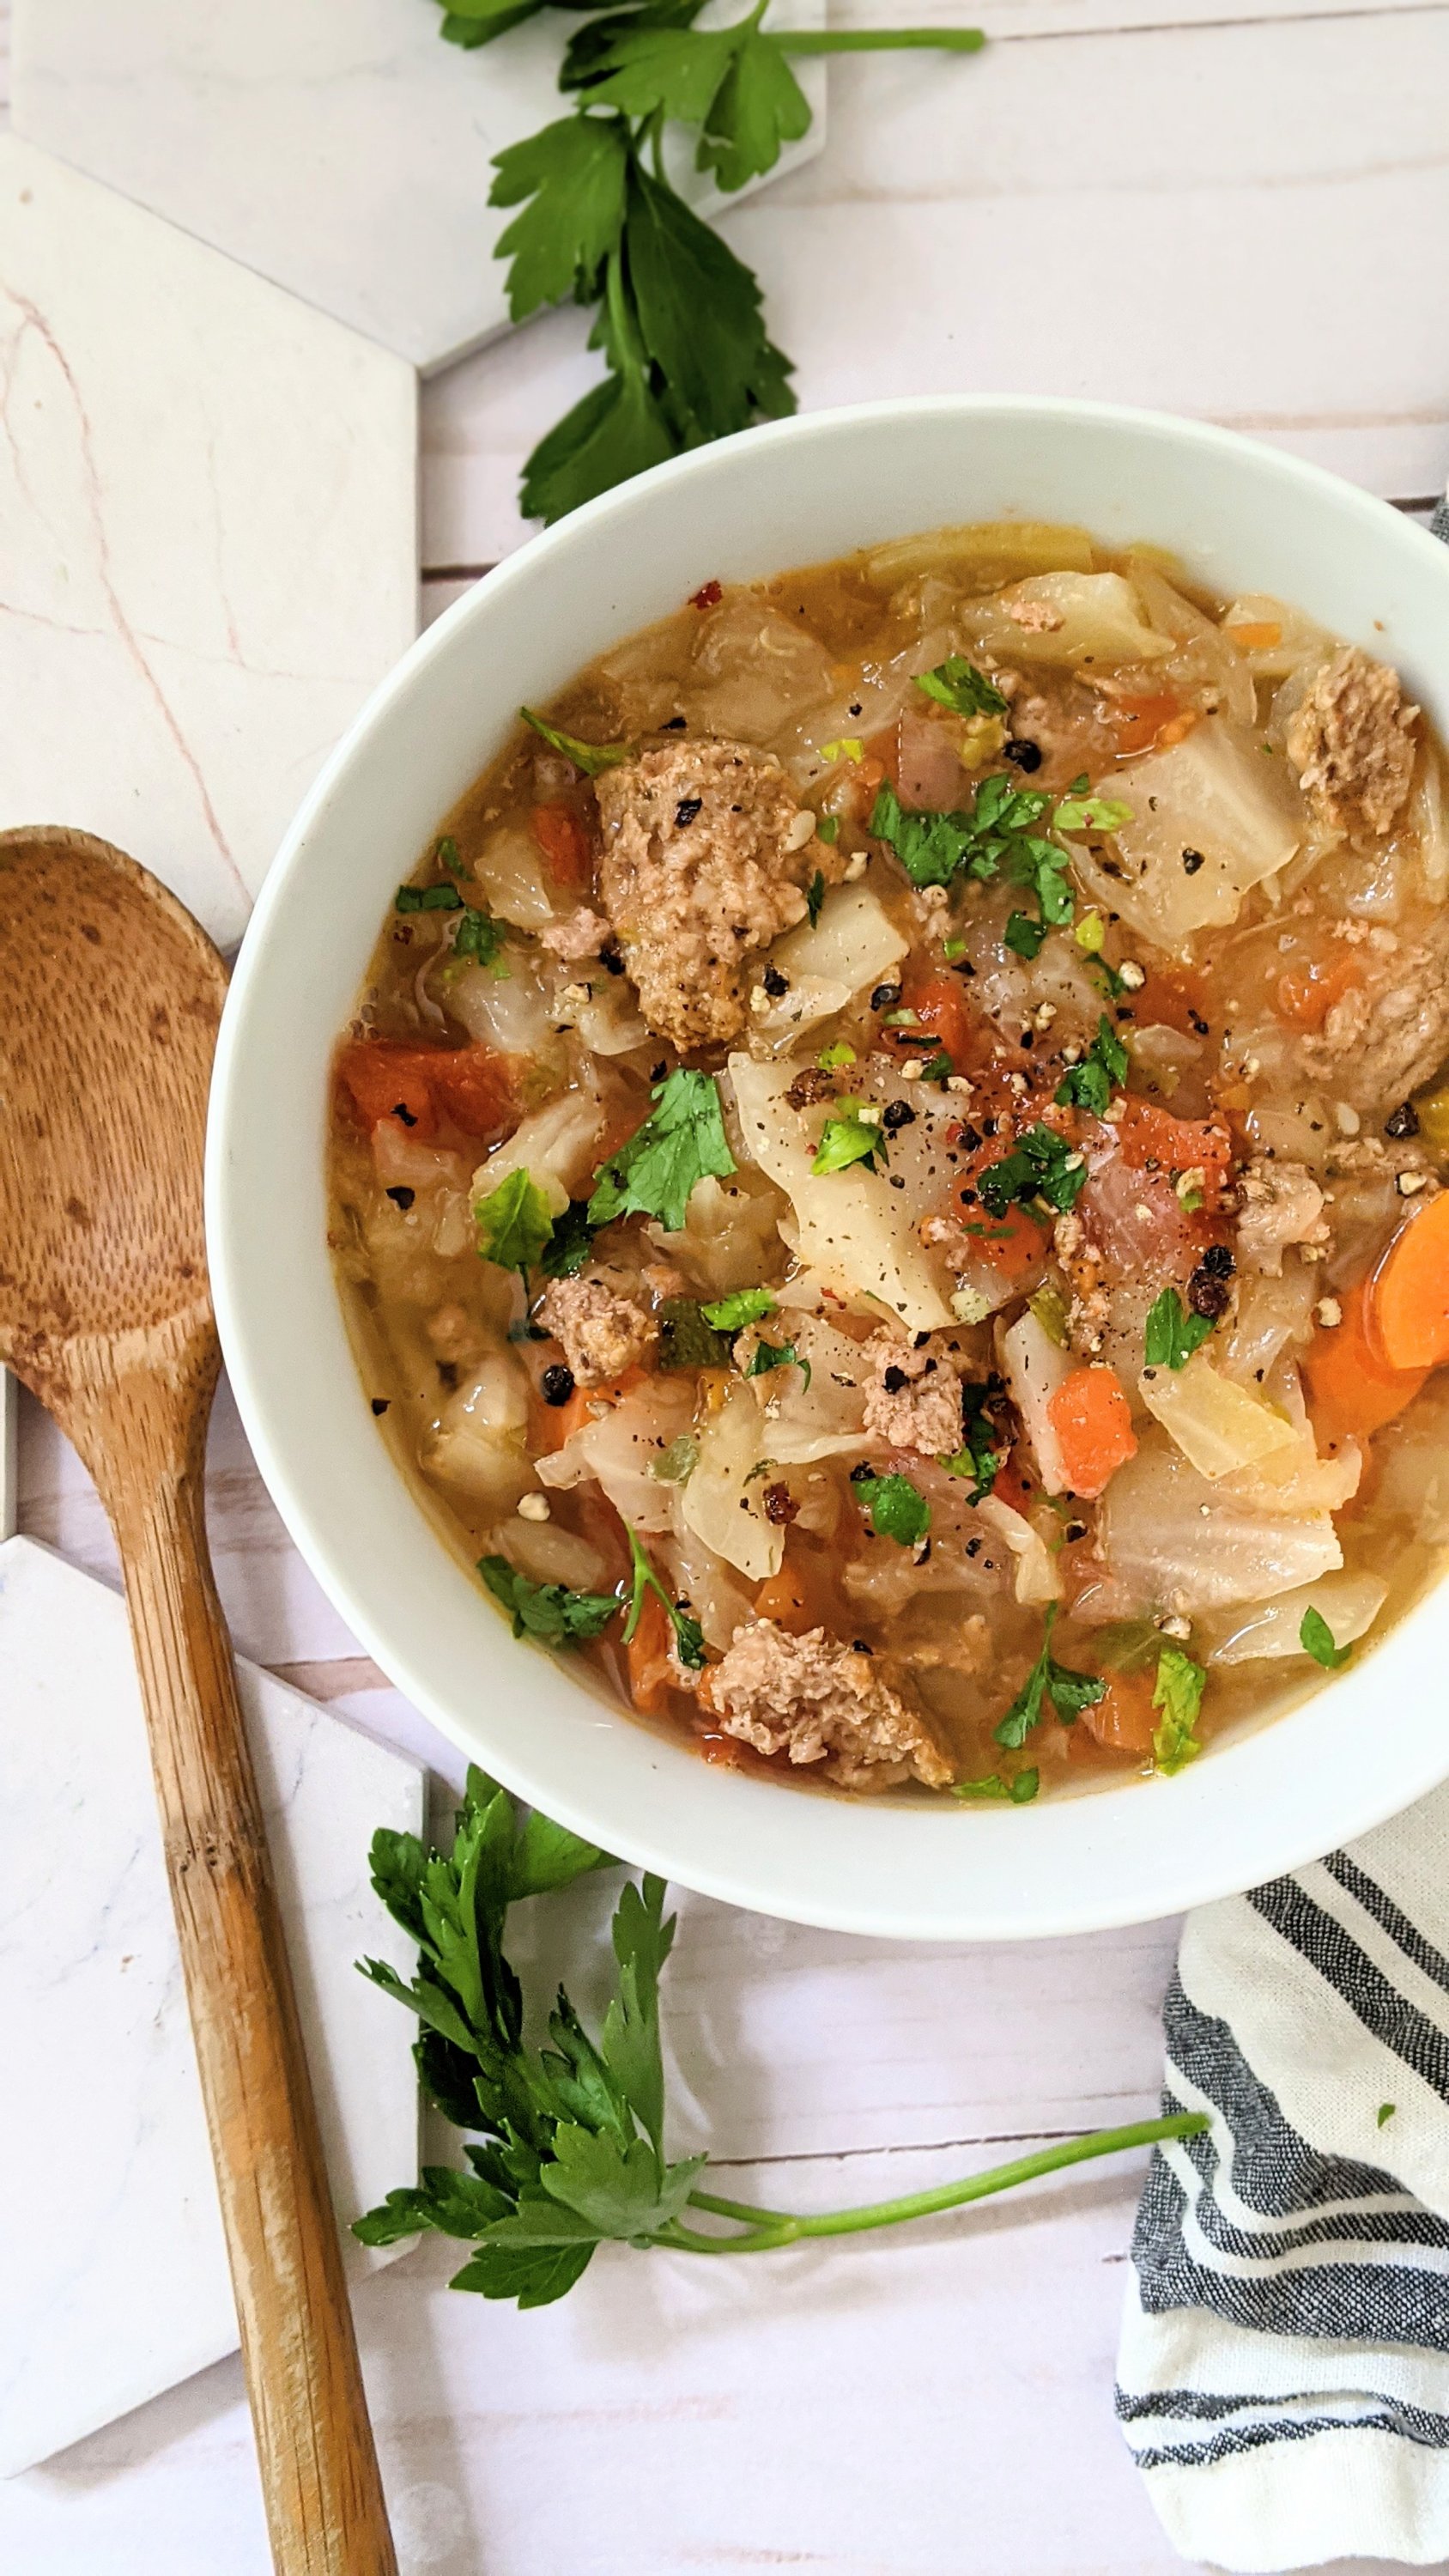 keto turkey cabbage soup instnat pot pressure cooker recipe thanksgiving leftover recipes 30 mintues gluten free recipes for turkey dairy free soups healthy low car high protein turkey recipes